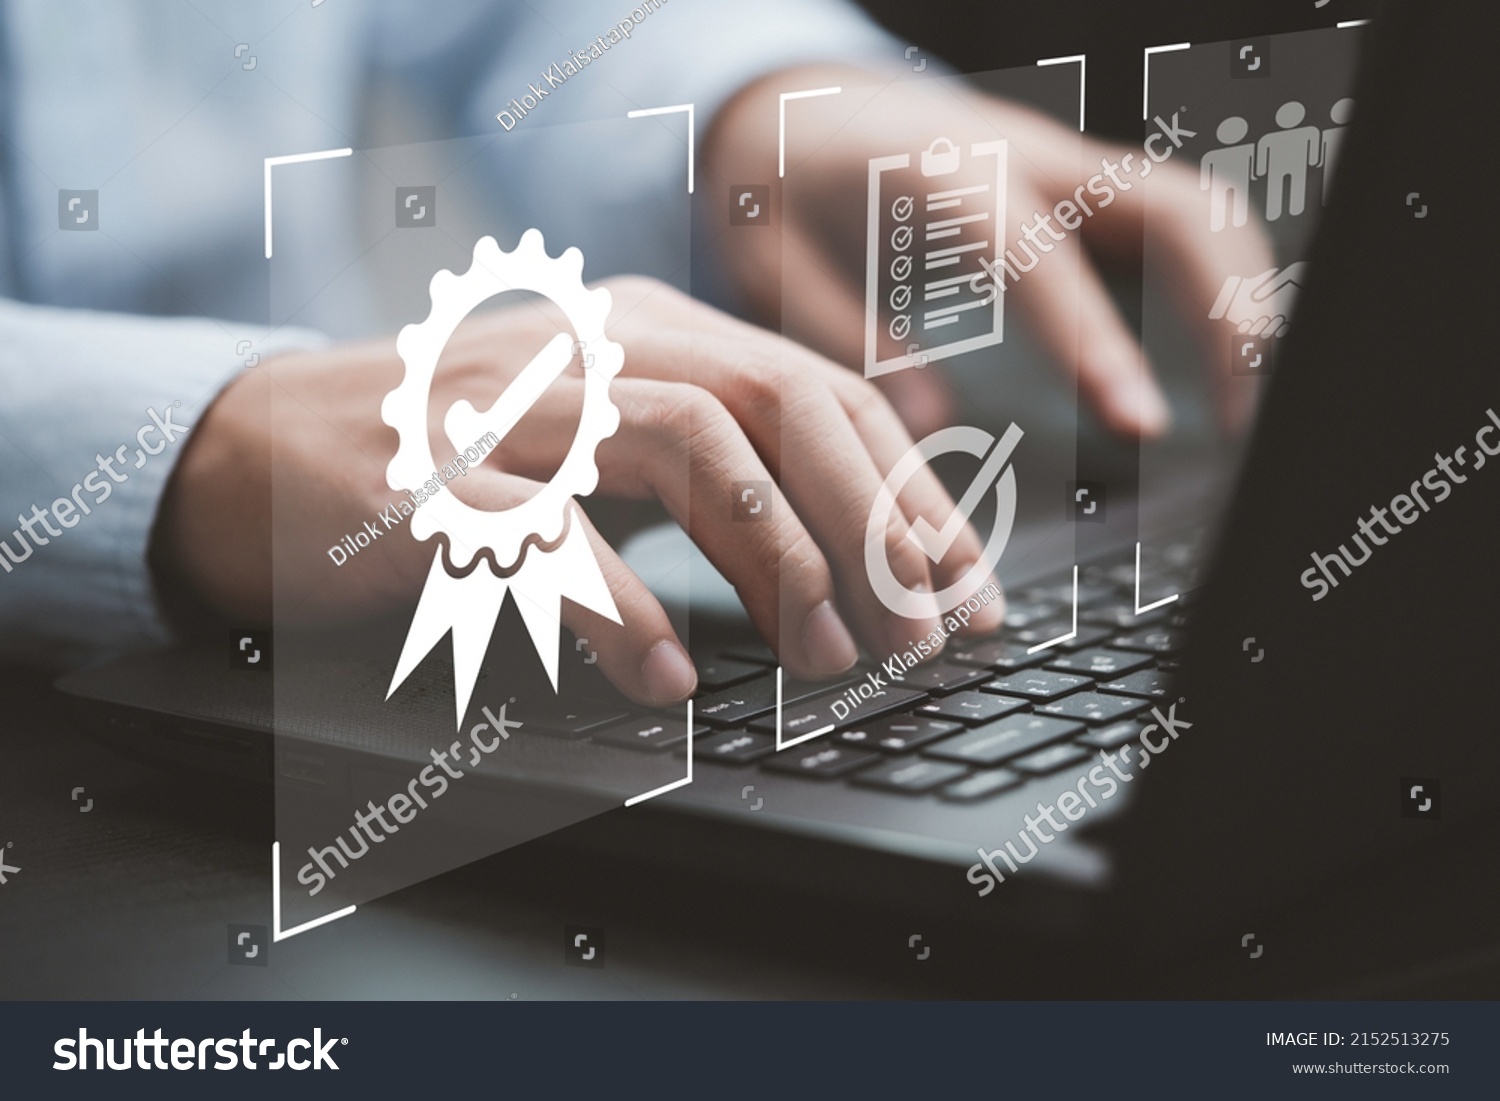 Businessman using laptop computer with quality assurance and document icon for ISO or International Standard Organisation which related quality control and continuous improvement concept. #2152513275